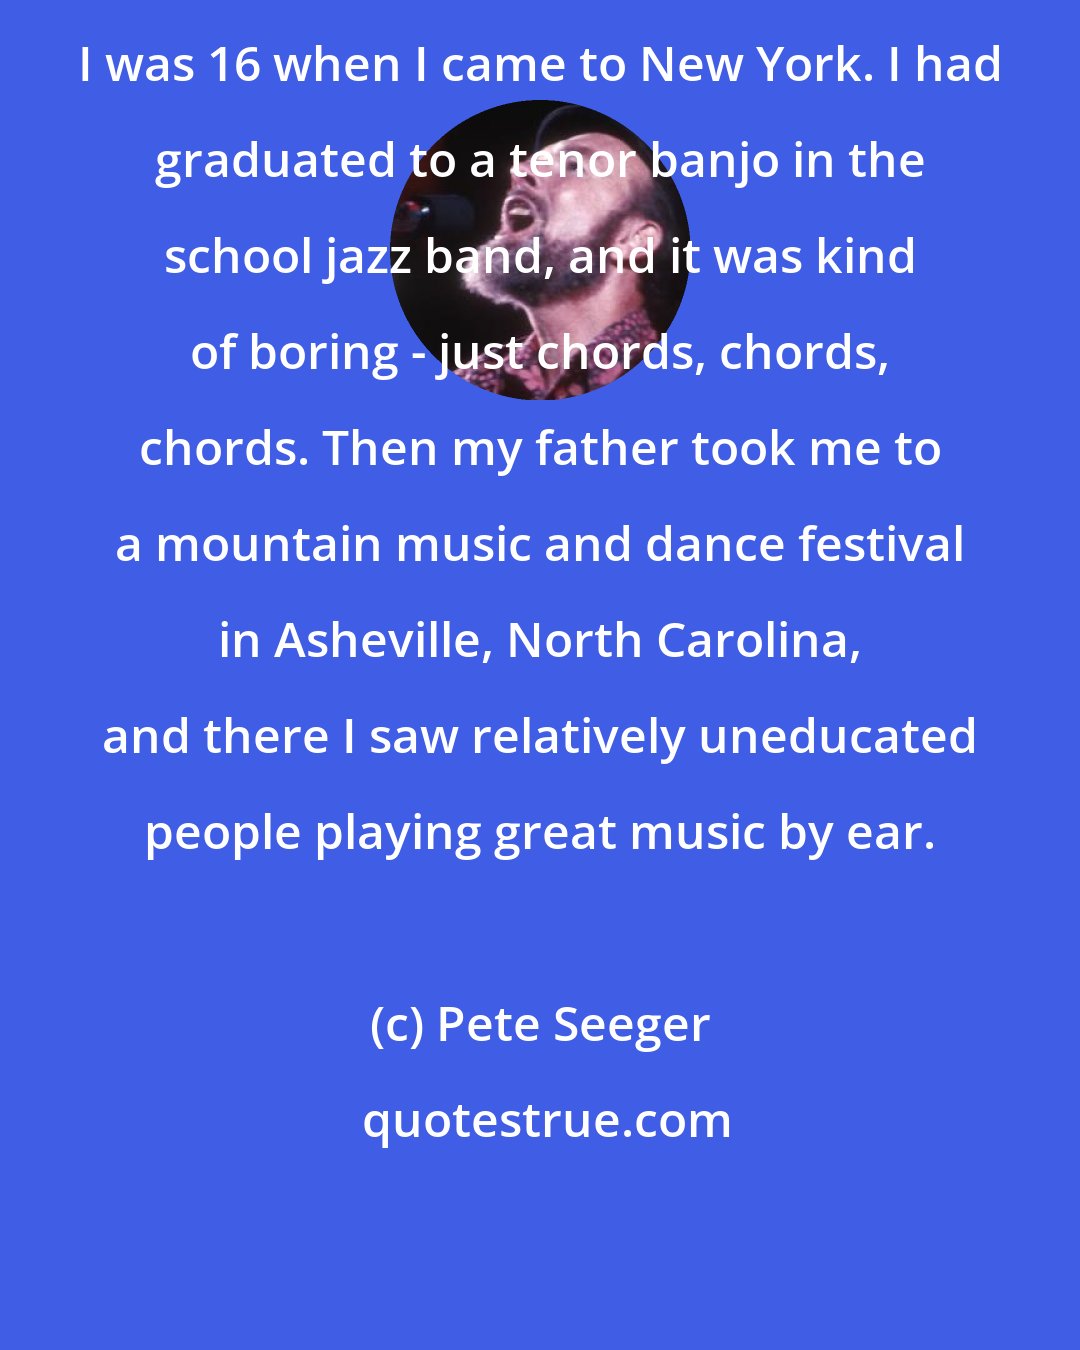 Pete Seeger: I was 16 when I came to New York. I had graduated to a tenor banjo in the school jazz band, and it was kind of boring - just chords, chords, chords. Then my father took me to a mountain music and dance festival in Asheville, North Carolina, and there I saw relatively uneducated people playing great music by ear.